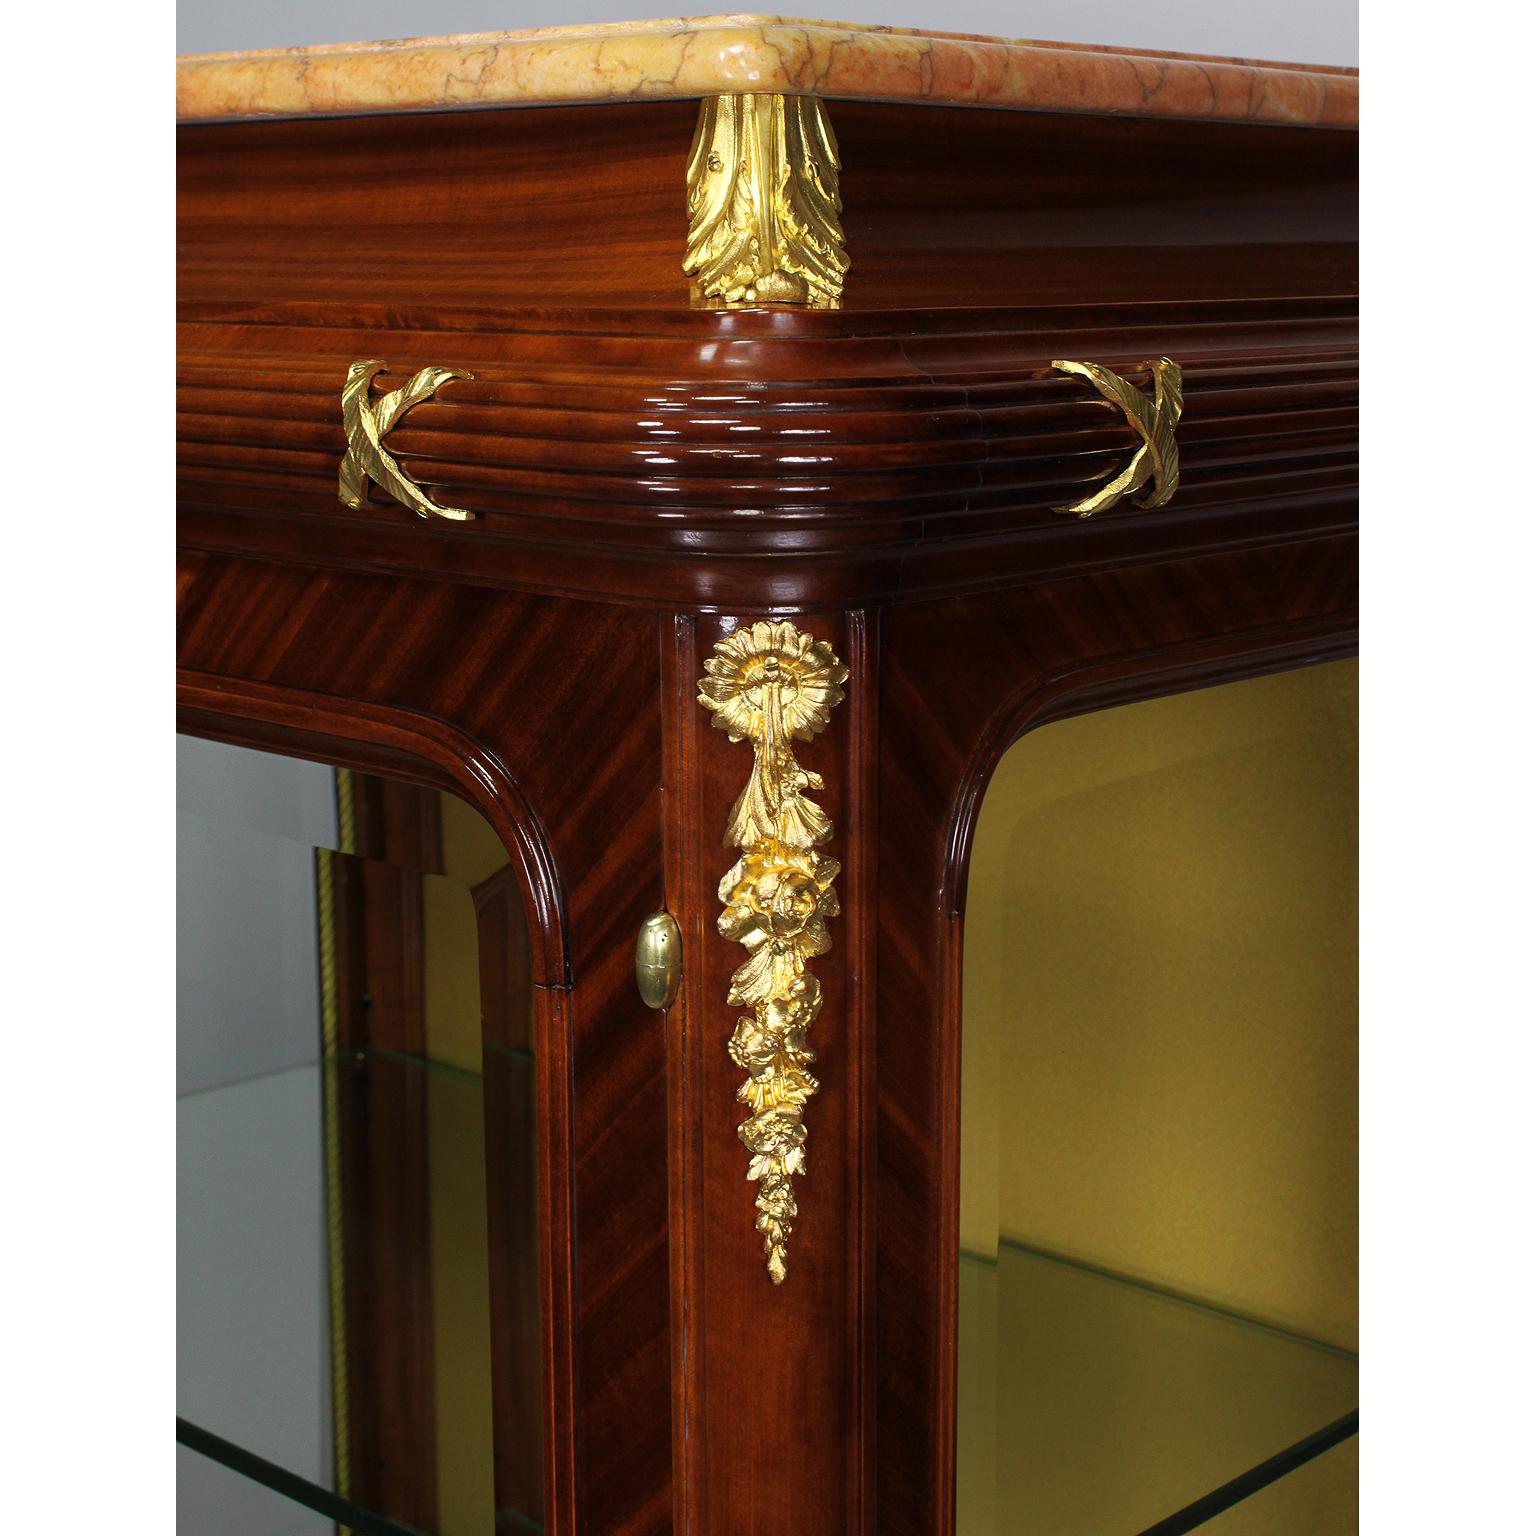 Fine French 19th-20th Century Louis XV Style Ormolu-Mounted Tulipwood Vitrine For Sale 1